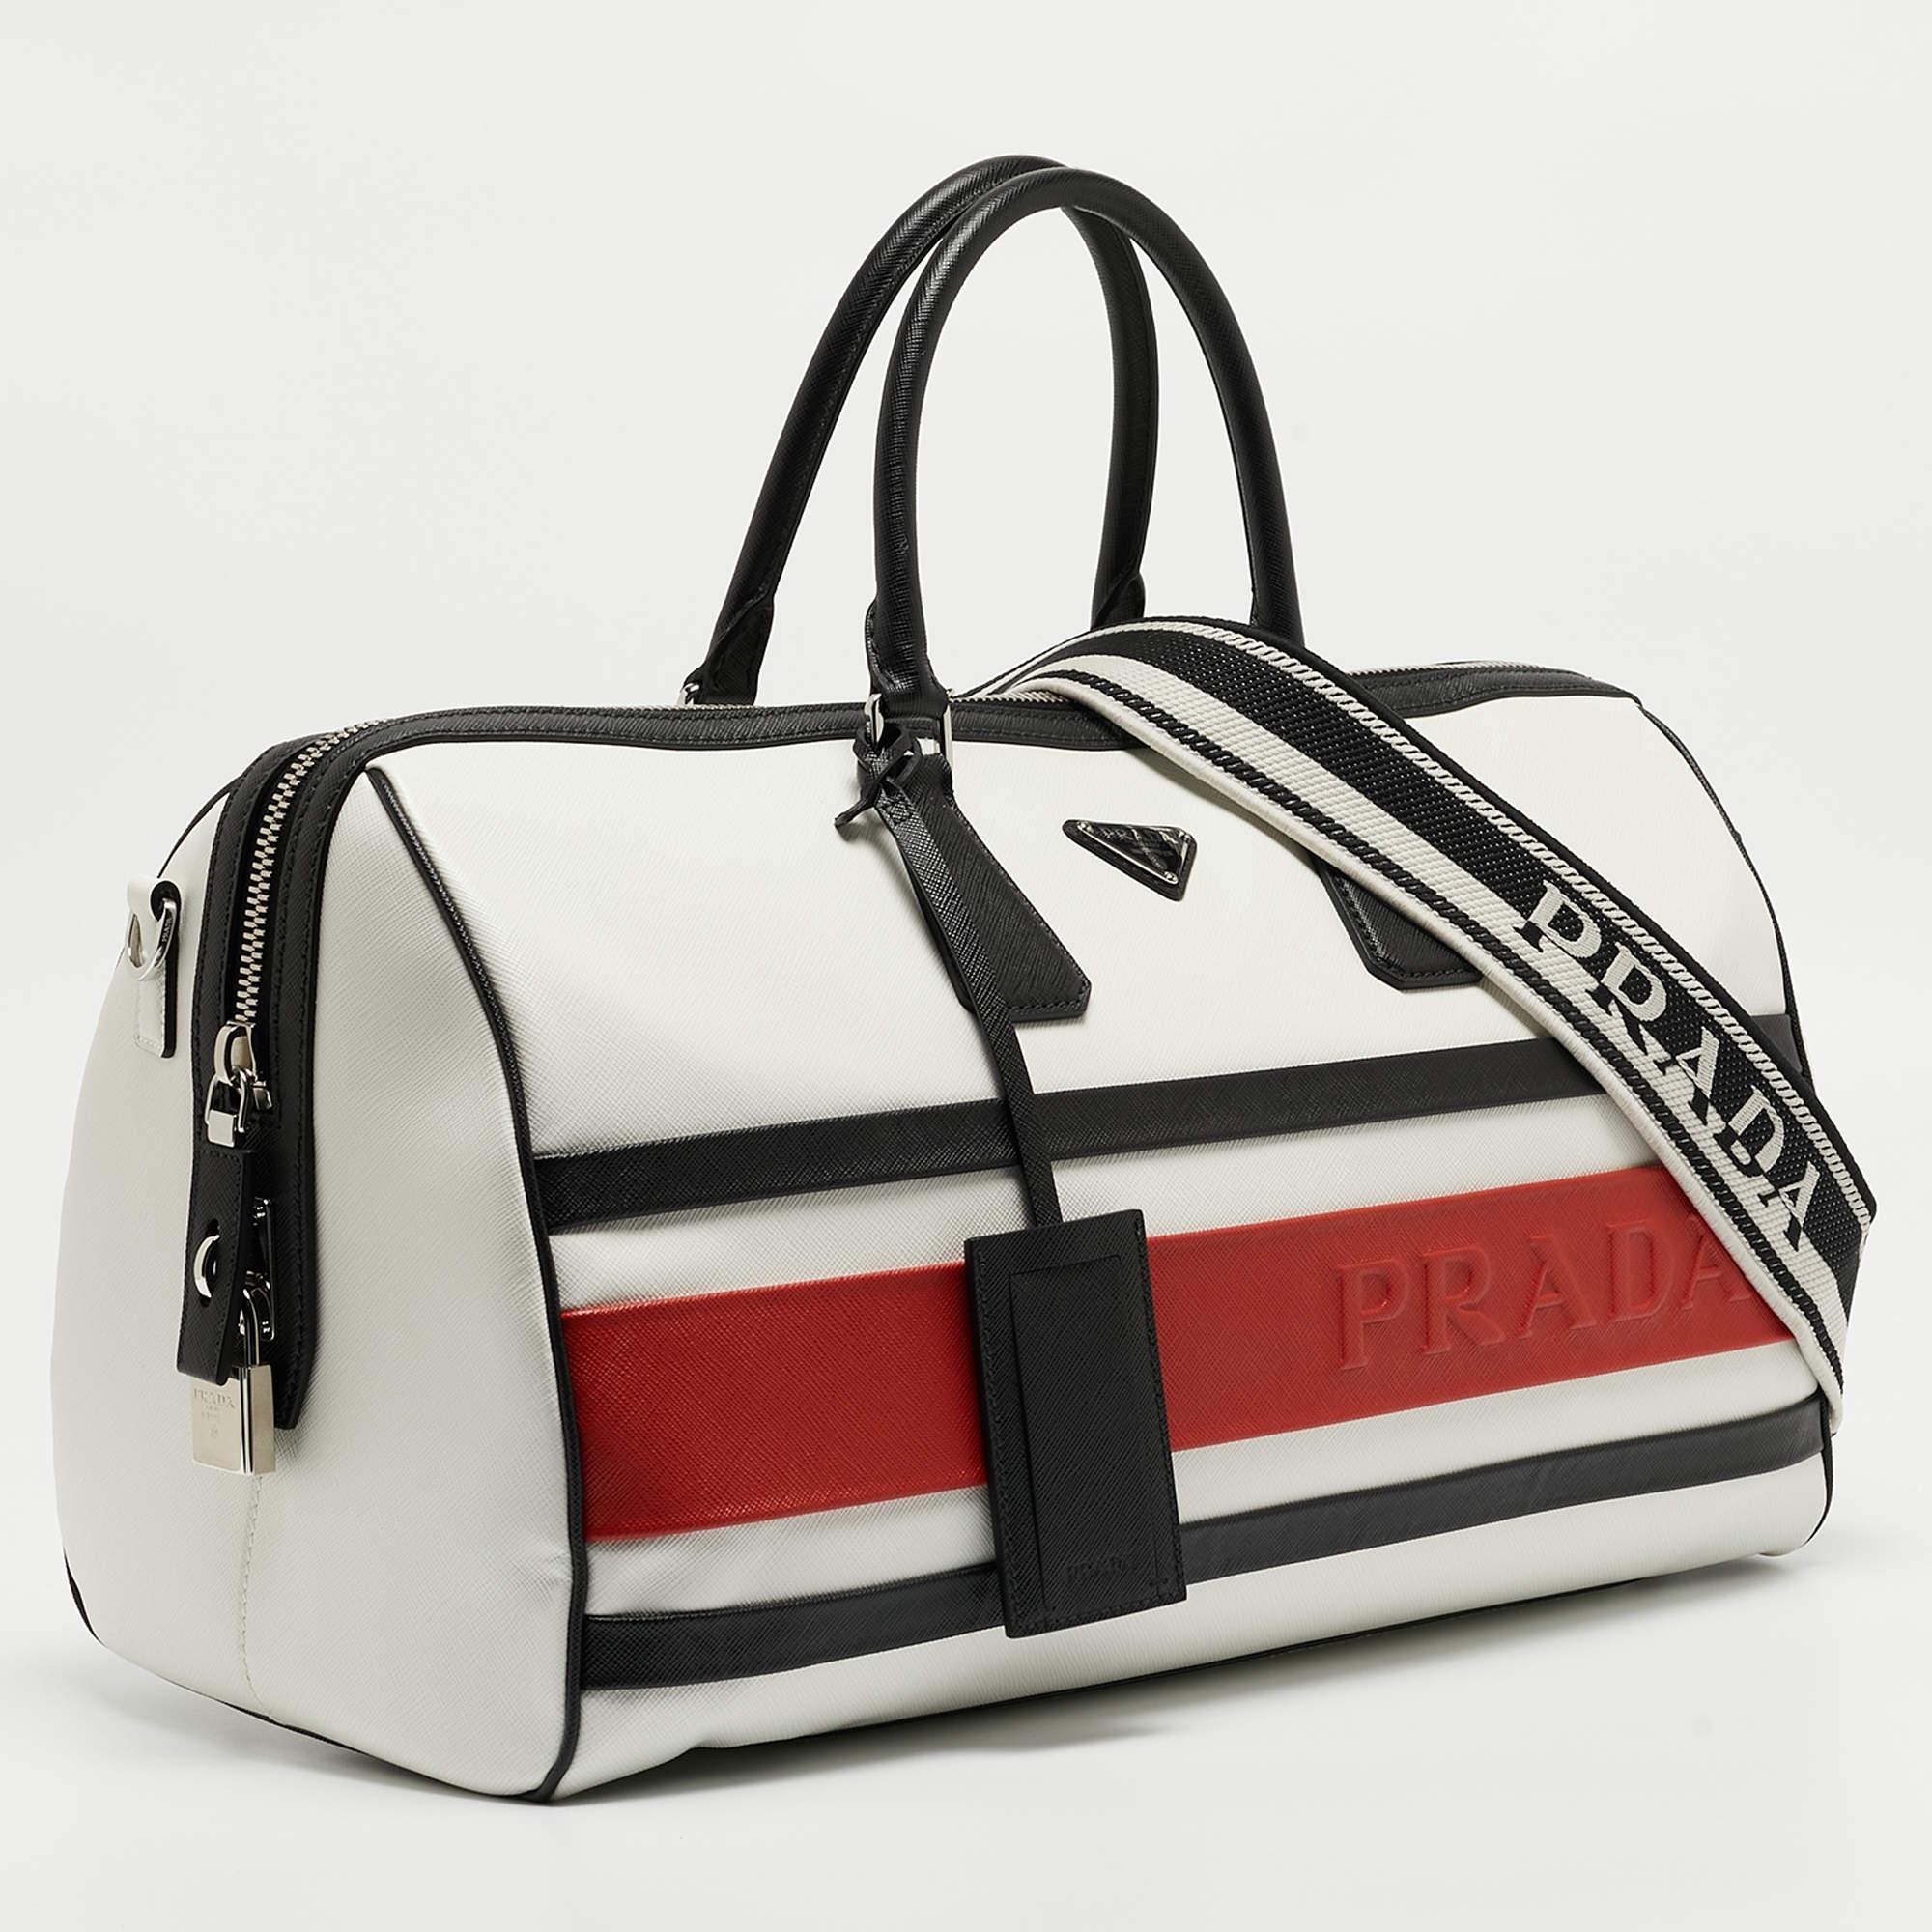 The Prada tavel bag is a luxurious and stylish accessory crafted from high-quality Saffiano leather. Featuring a tricolor design, it blends sophistication with functionality, offering ample storage space for travel essentials. The iconic Prada logo